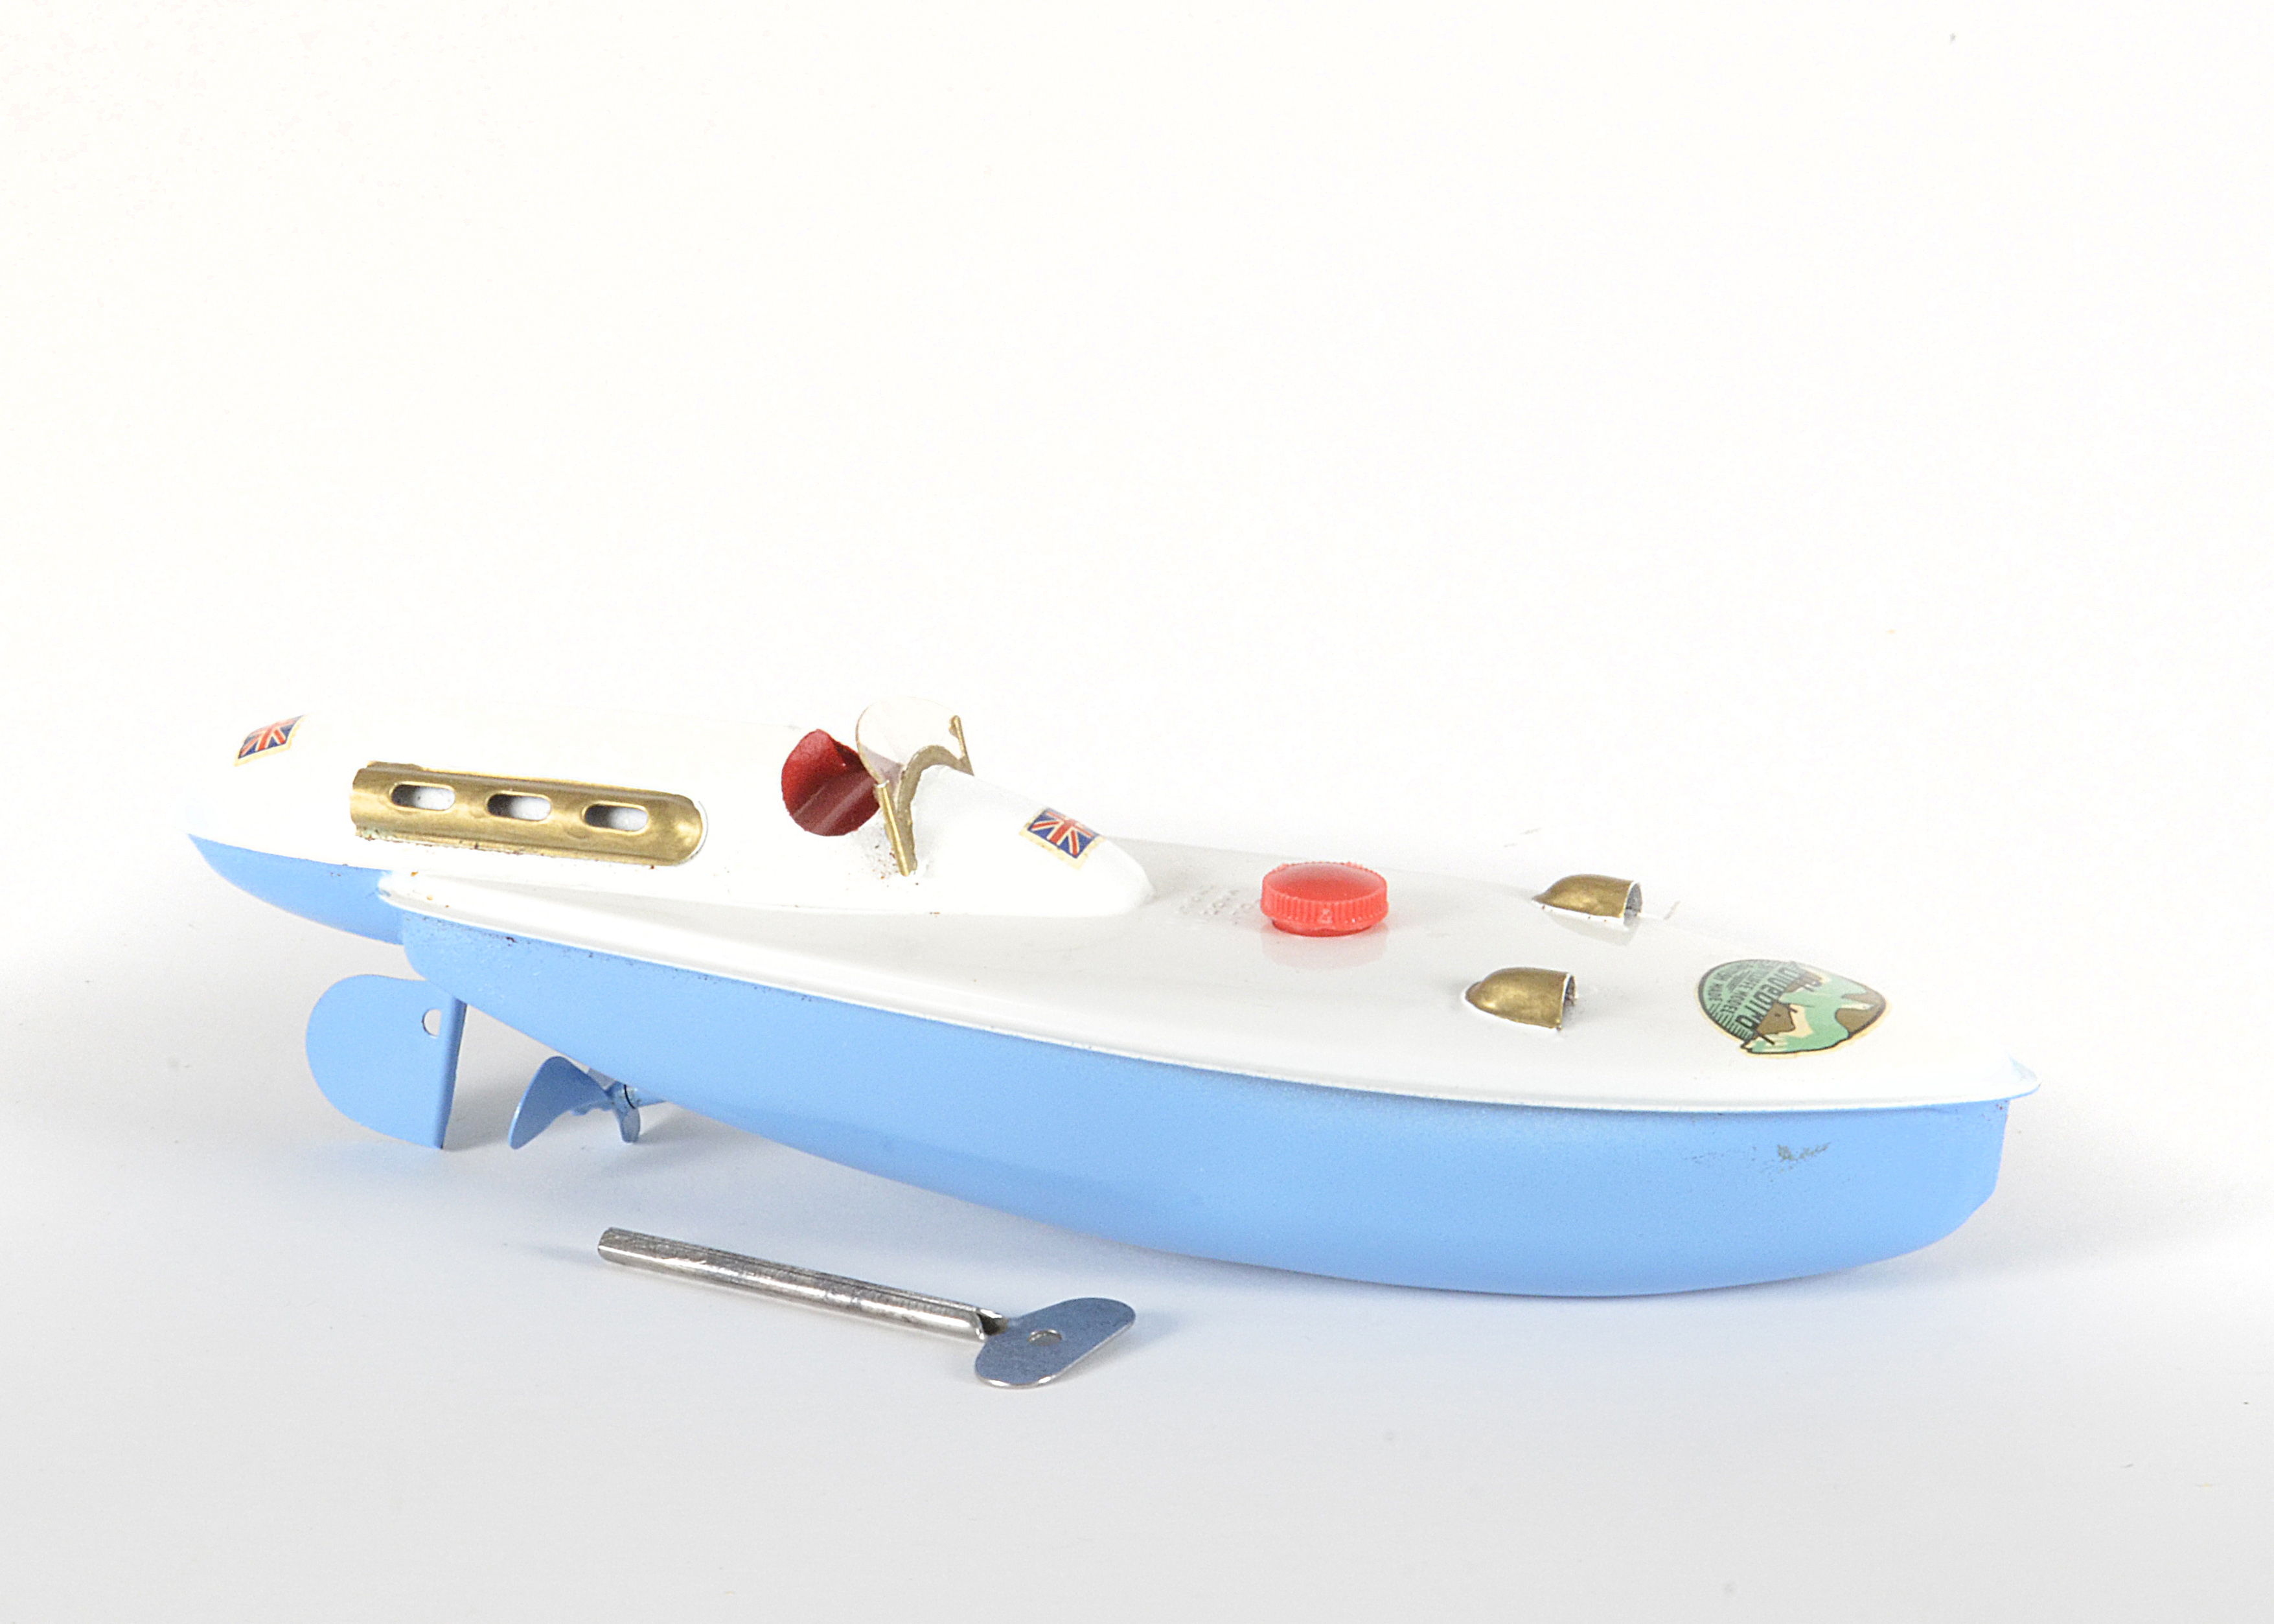 A Sutcliffe clockwork Bluebird Model Boat, in light blue and white, clockwork tested well at time of